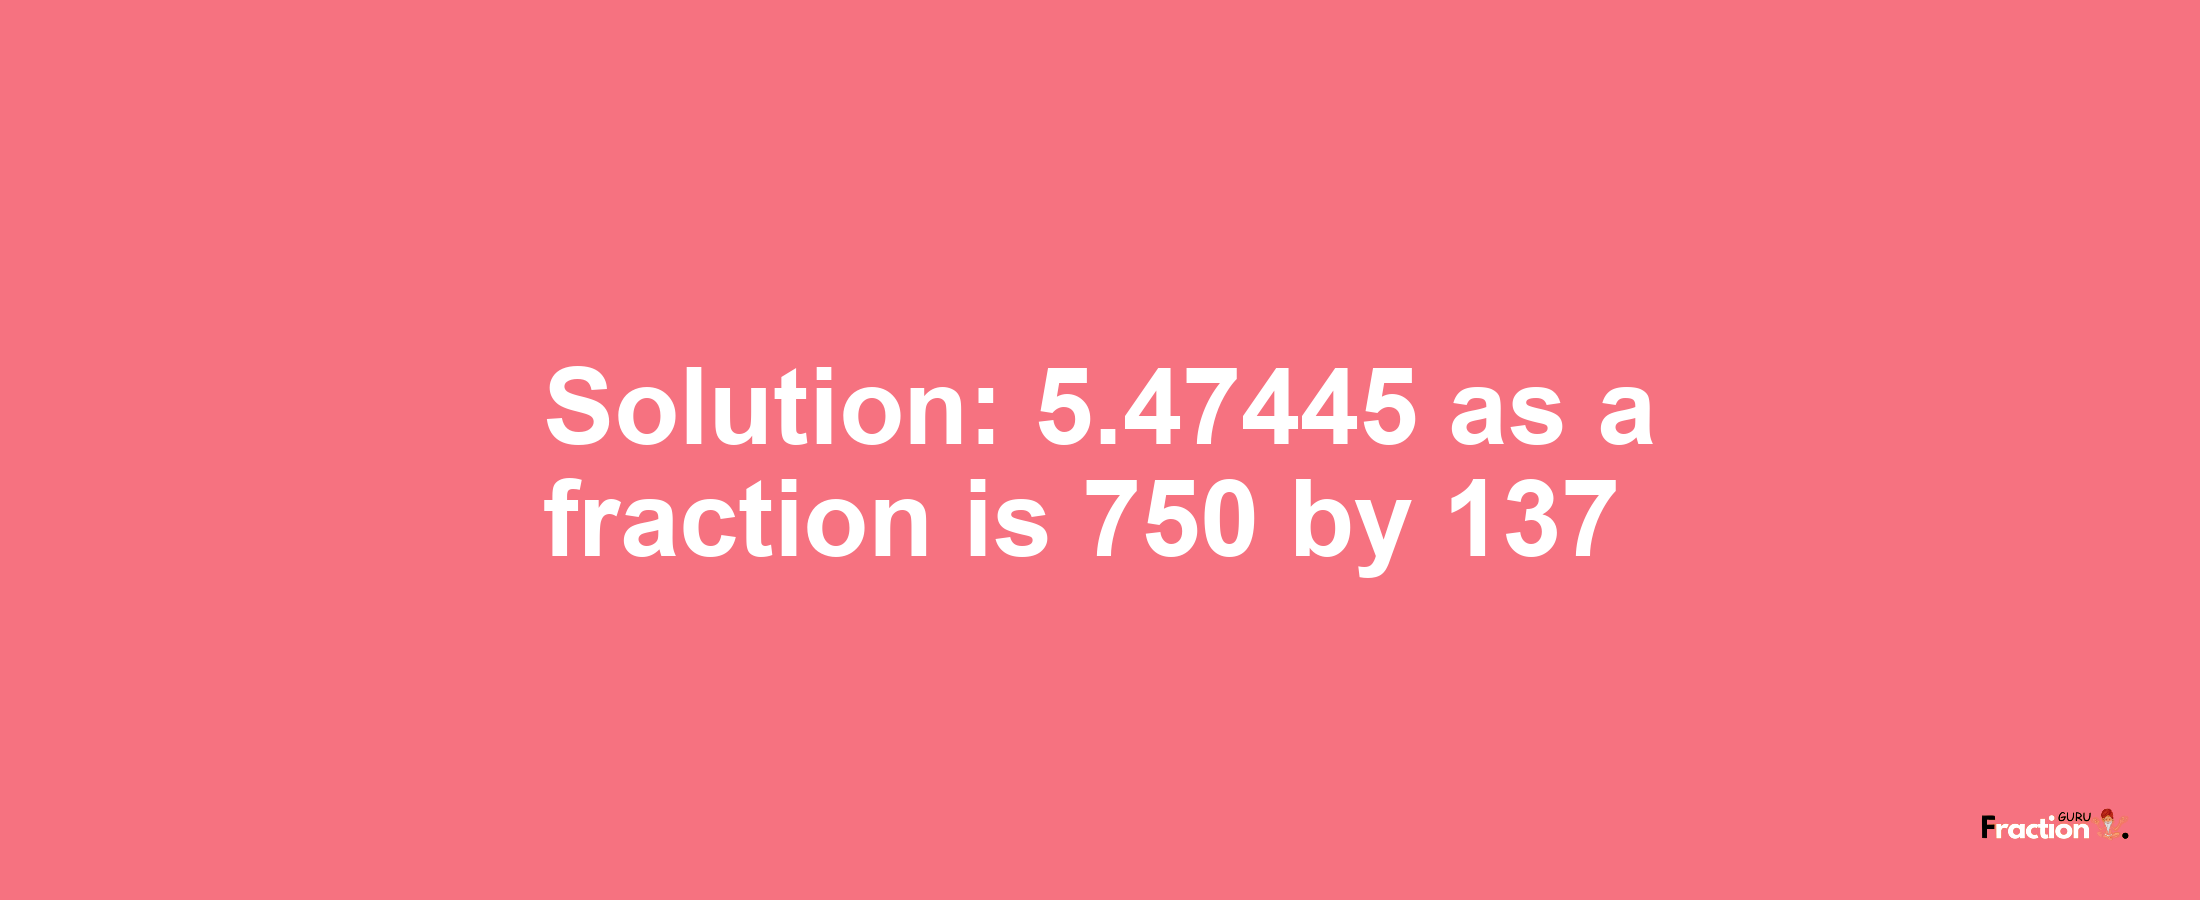 Solution:5.47445 as a fraction is 750/137